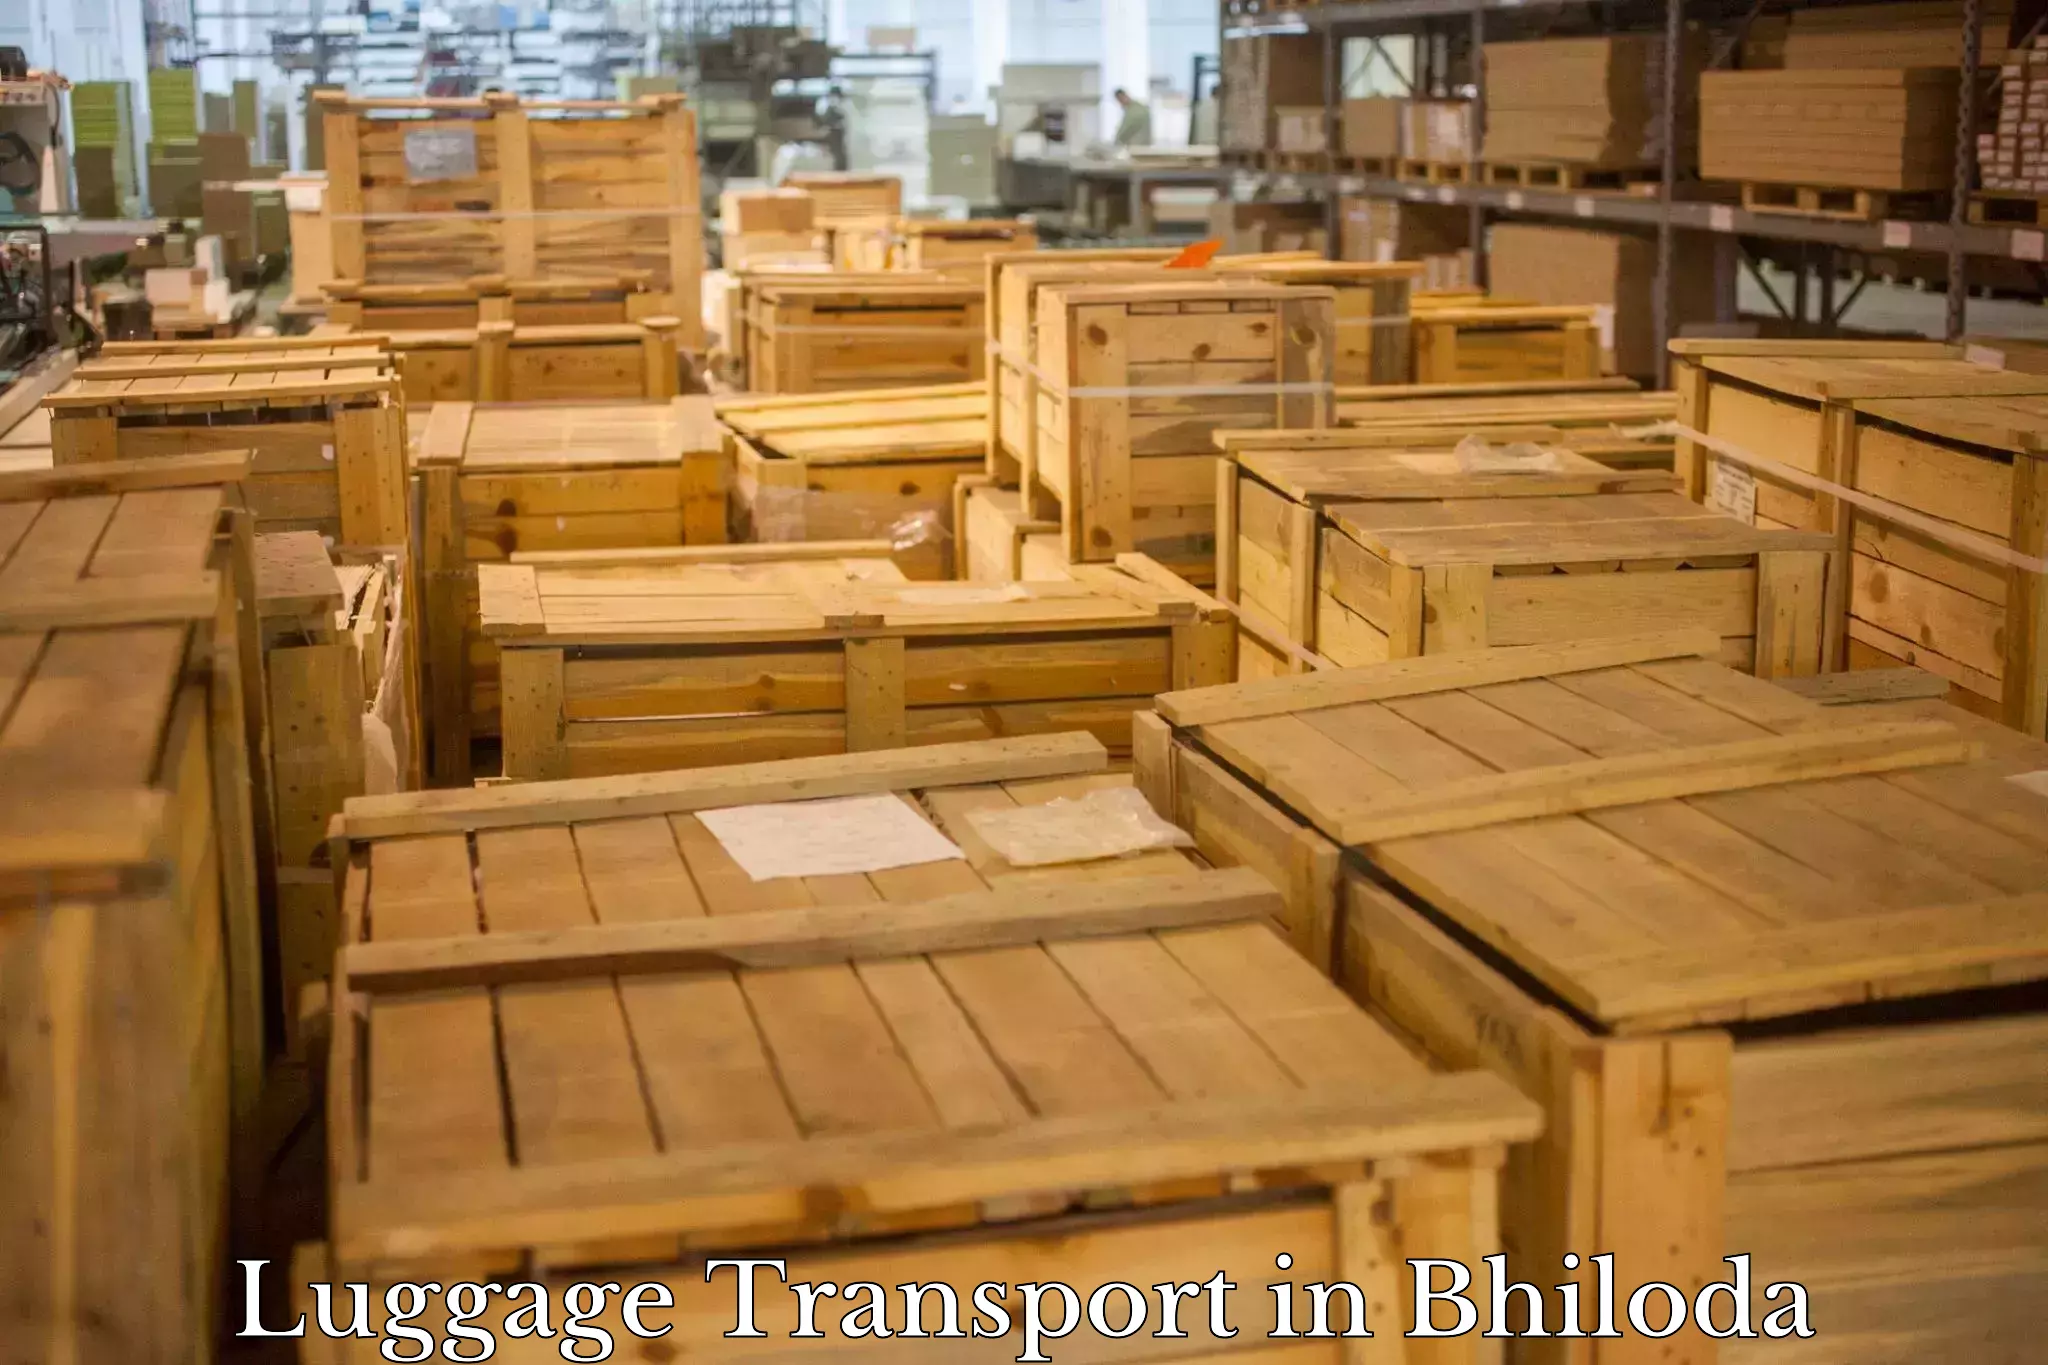 Automated luggage transport in Bhiloda